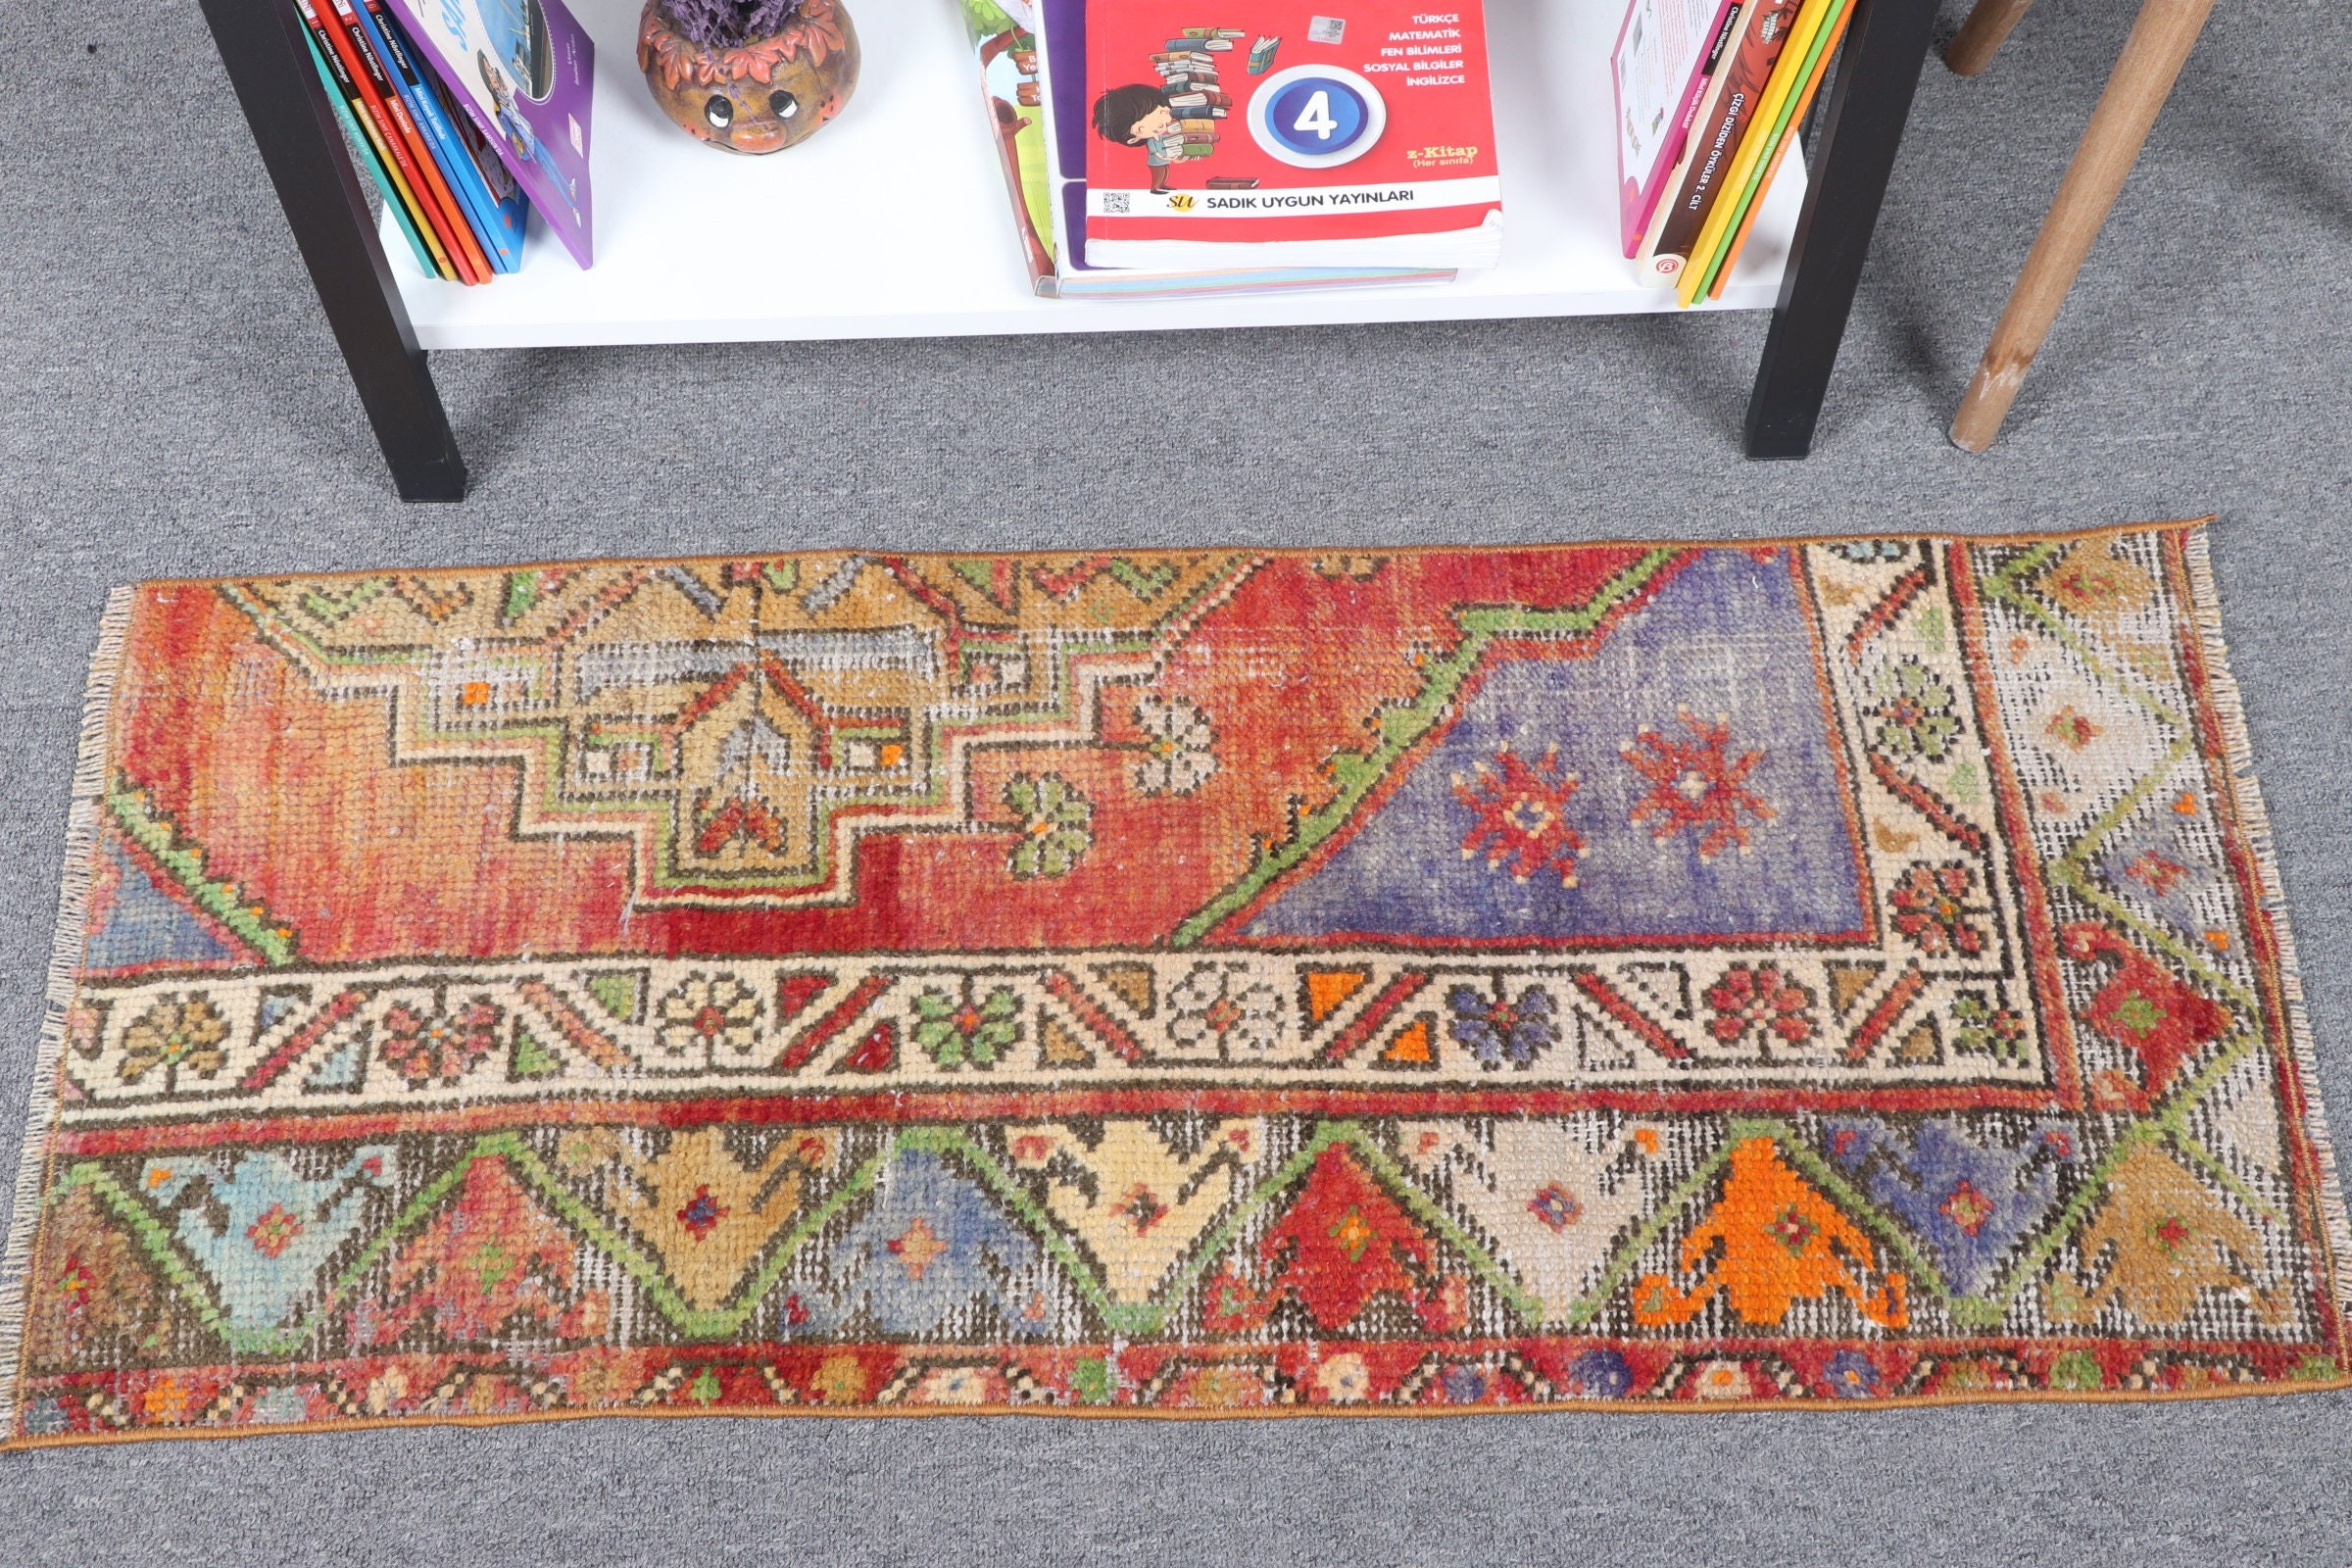 Wall Hanging Rug, Entry Rug, Turkish Rugs, 1.4x3.3 ft Small Rug, Vintage Rugs, Red Antique Rug, Oushak Rug, Floor Rug, Rugs for Car Mat